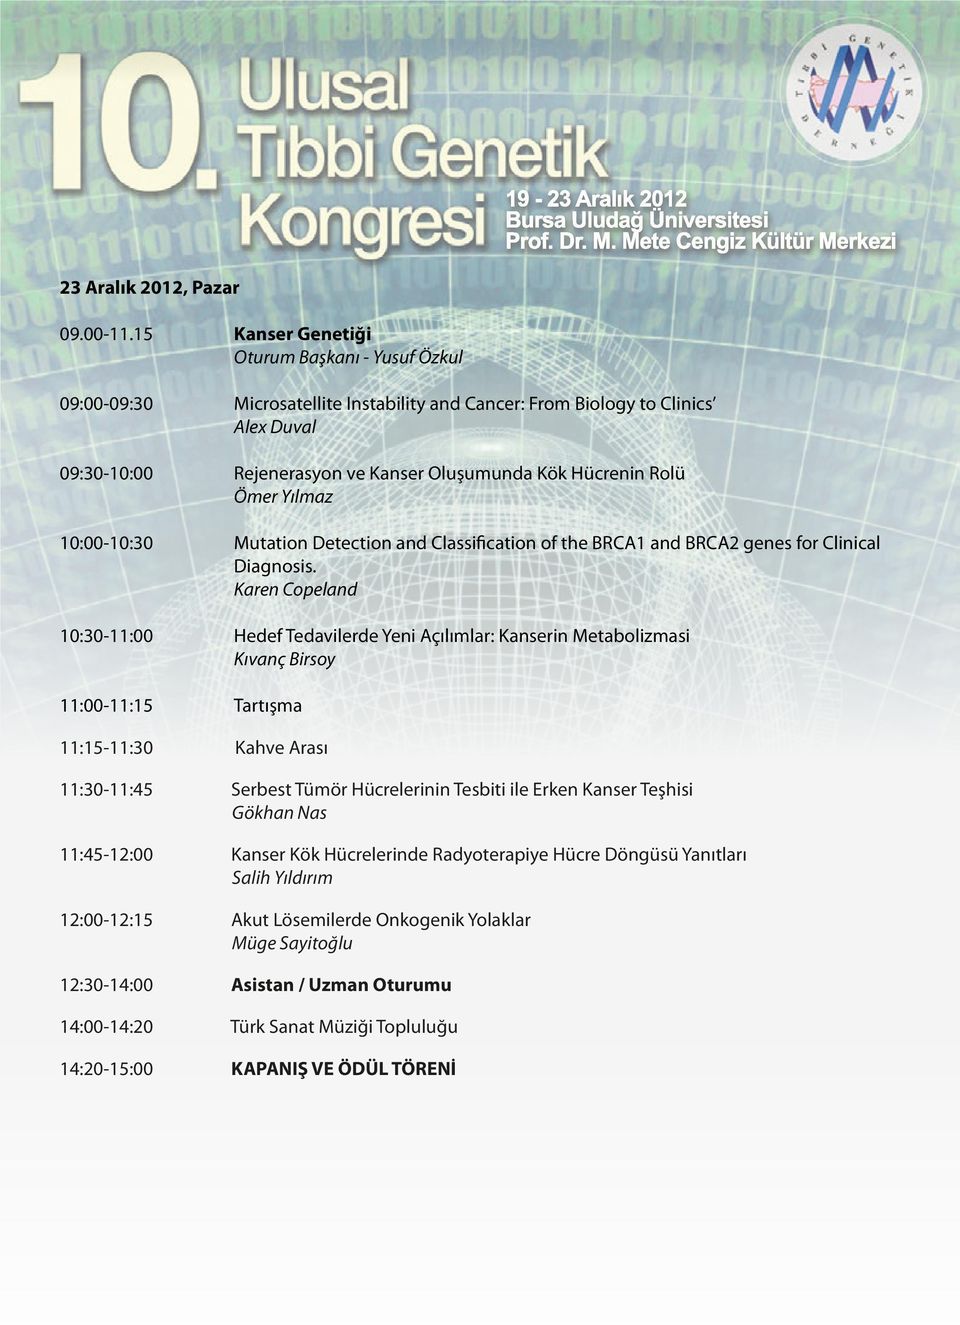 Ömer Yılmaz 10:00-10:30 Mutation Detection and Classification of the BRCA1 and BRCA2 genes for Clinical Diagnosis.